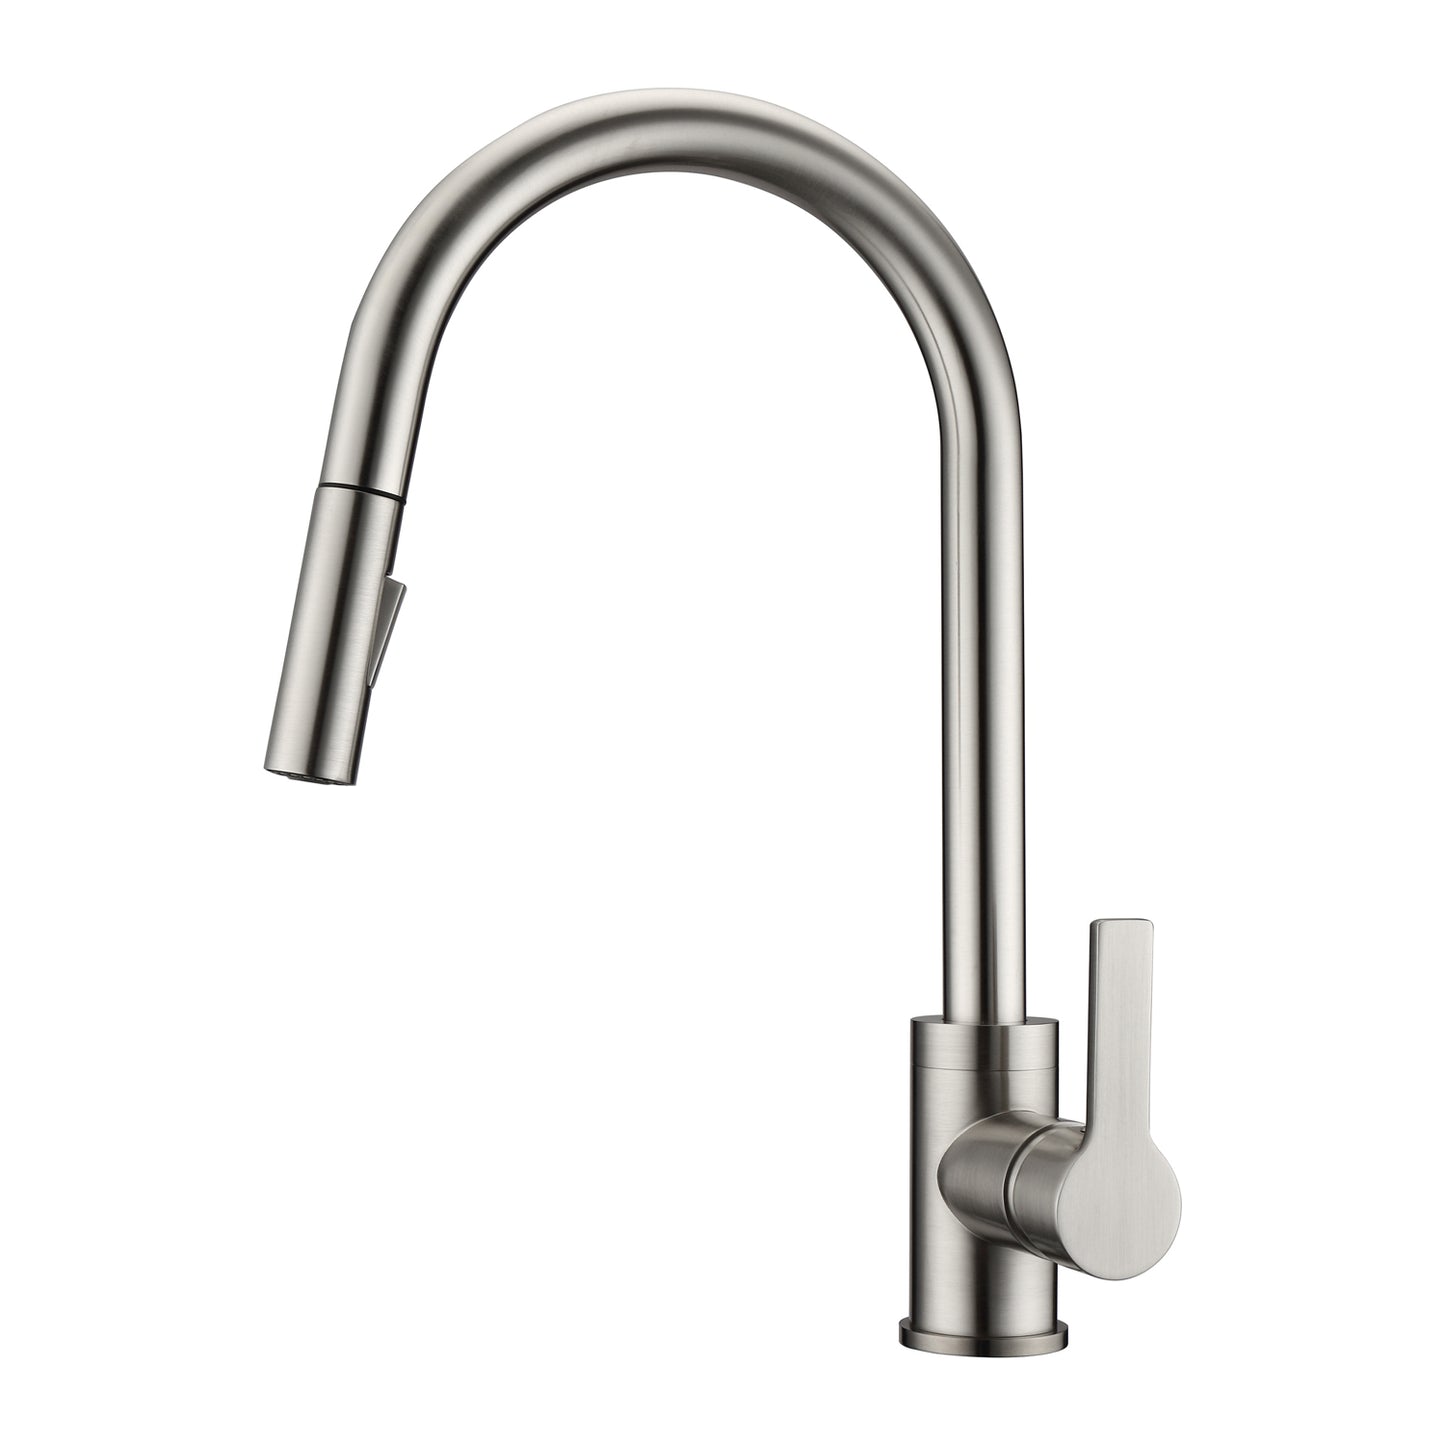 Fenton 2 Kitchen Faucet, Pull-Out Sprayer, Single Lever Handle, Brushed Nickel